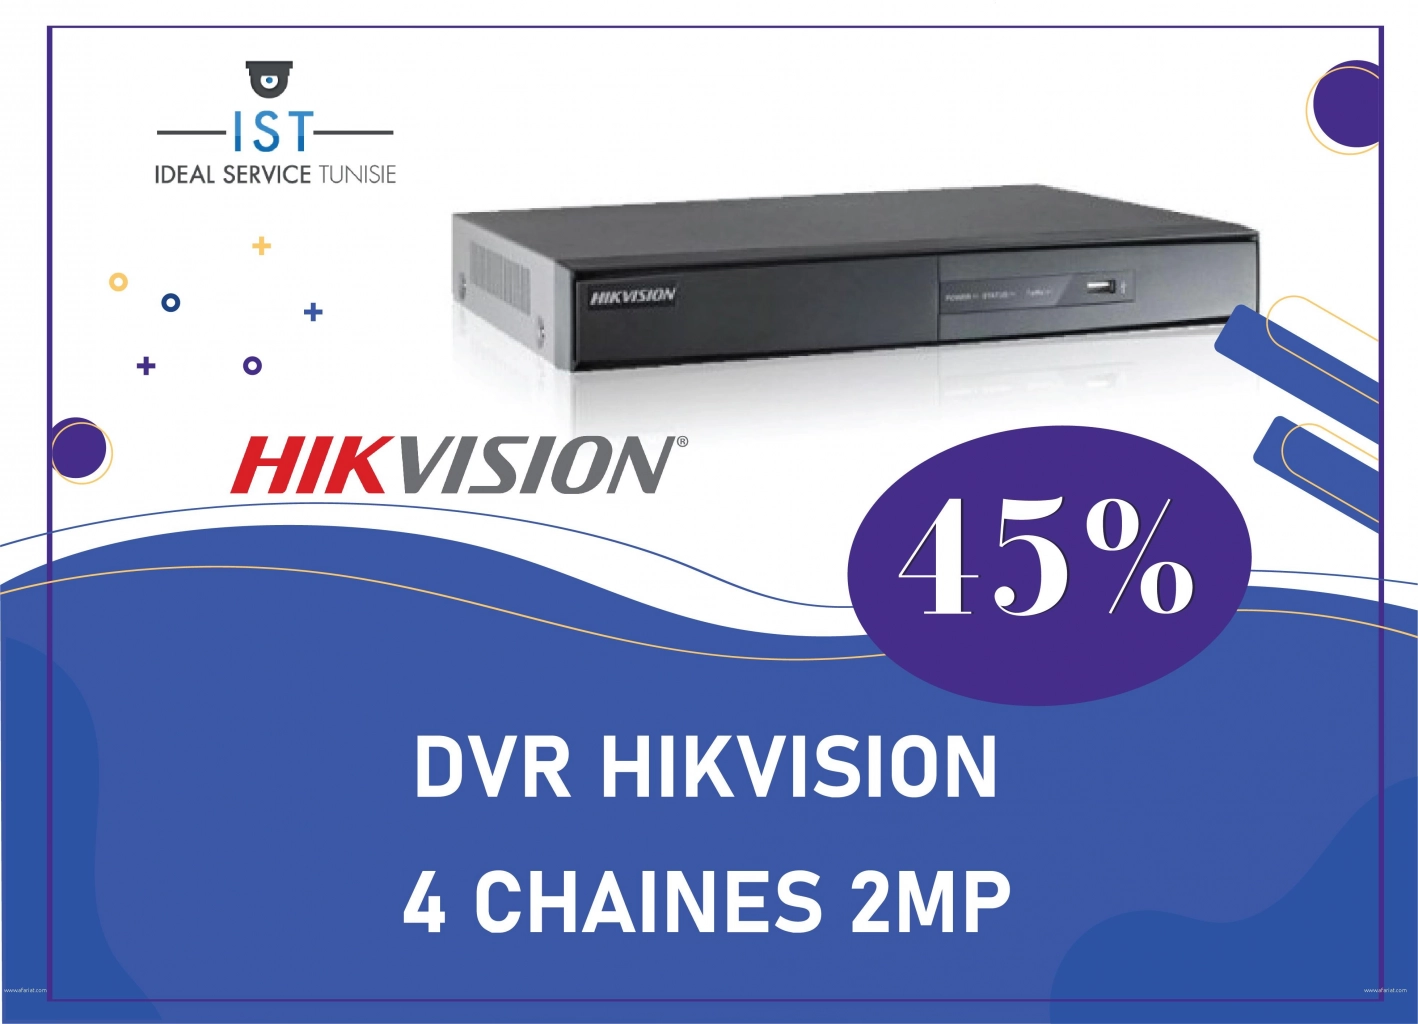 IST: DVR HIKVISION 4 CHAINES 2MP